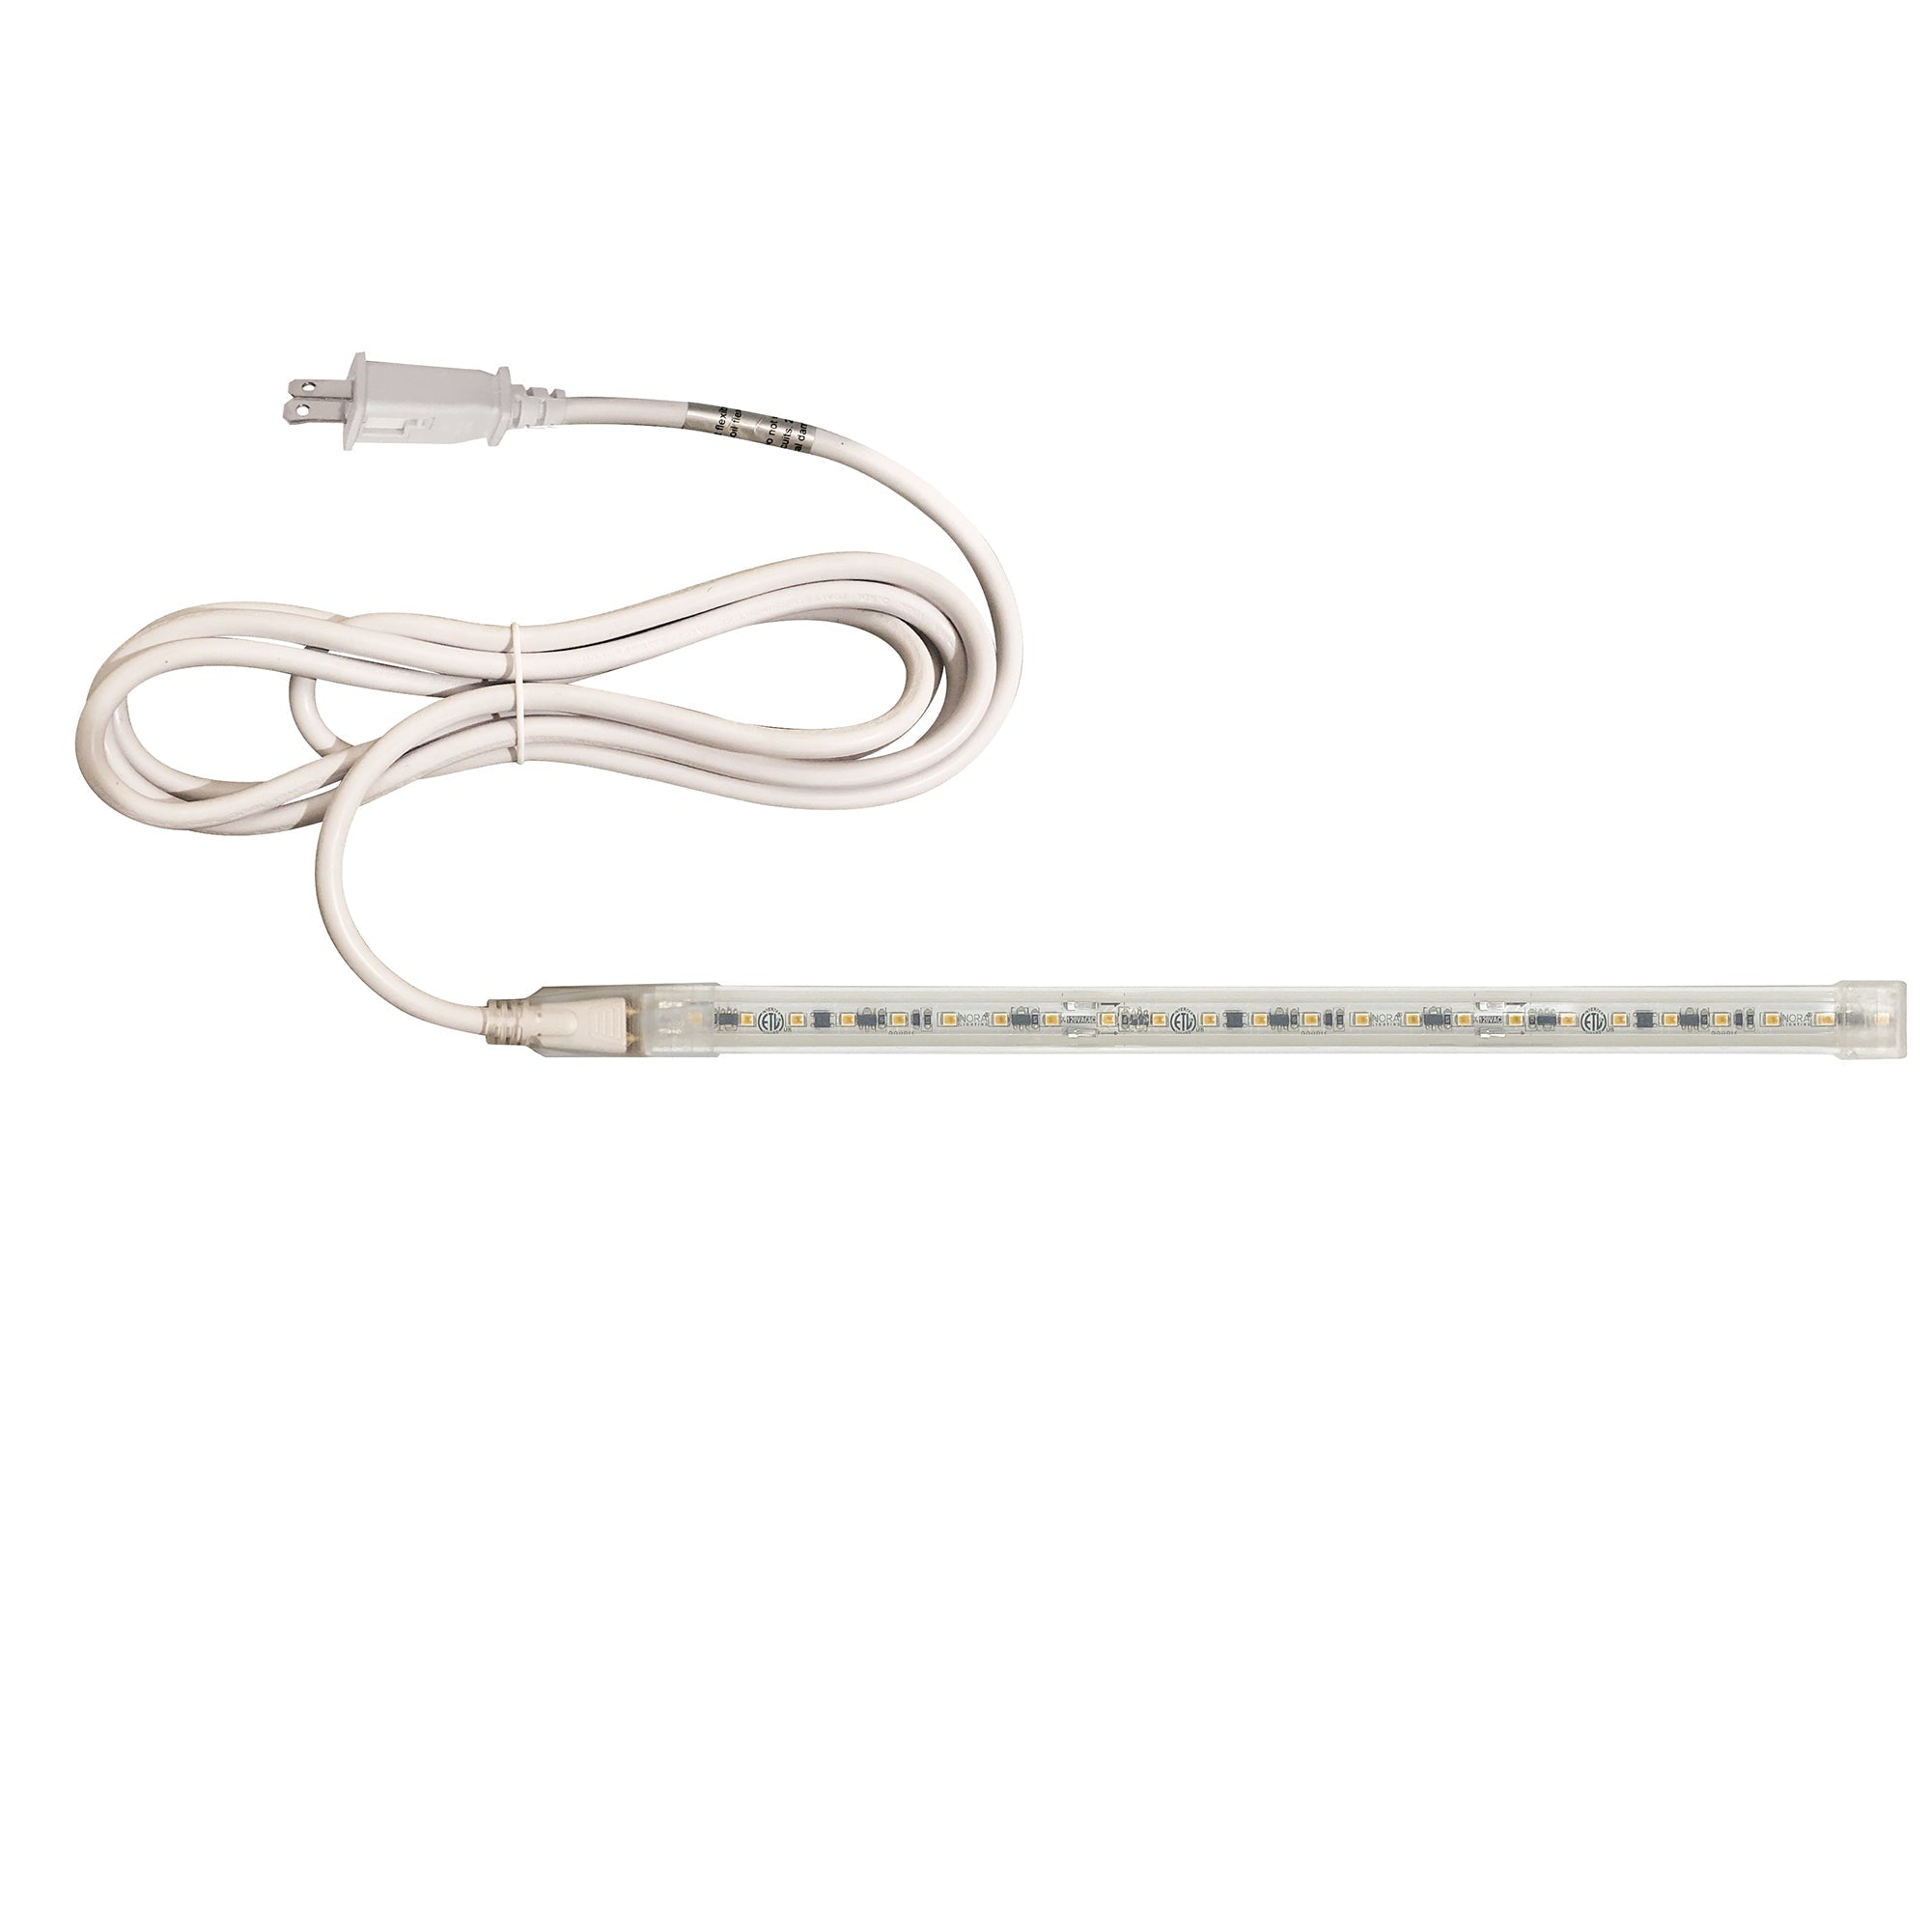 Nora Lighting NUTP13-W84-12-930/CP - Accent / Undercabinet - Custom Cut 84-ft 120V Continuous LED Tape Light, 330lm / 3.6W per foot, 3000K, w/ Mounting Clips and 8' Cord & Plug